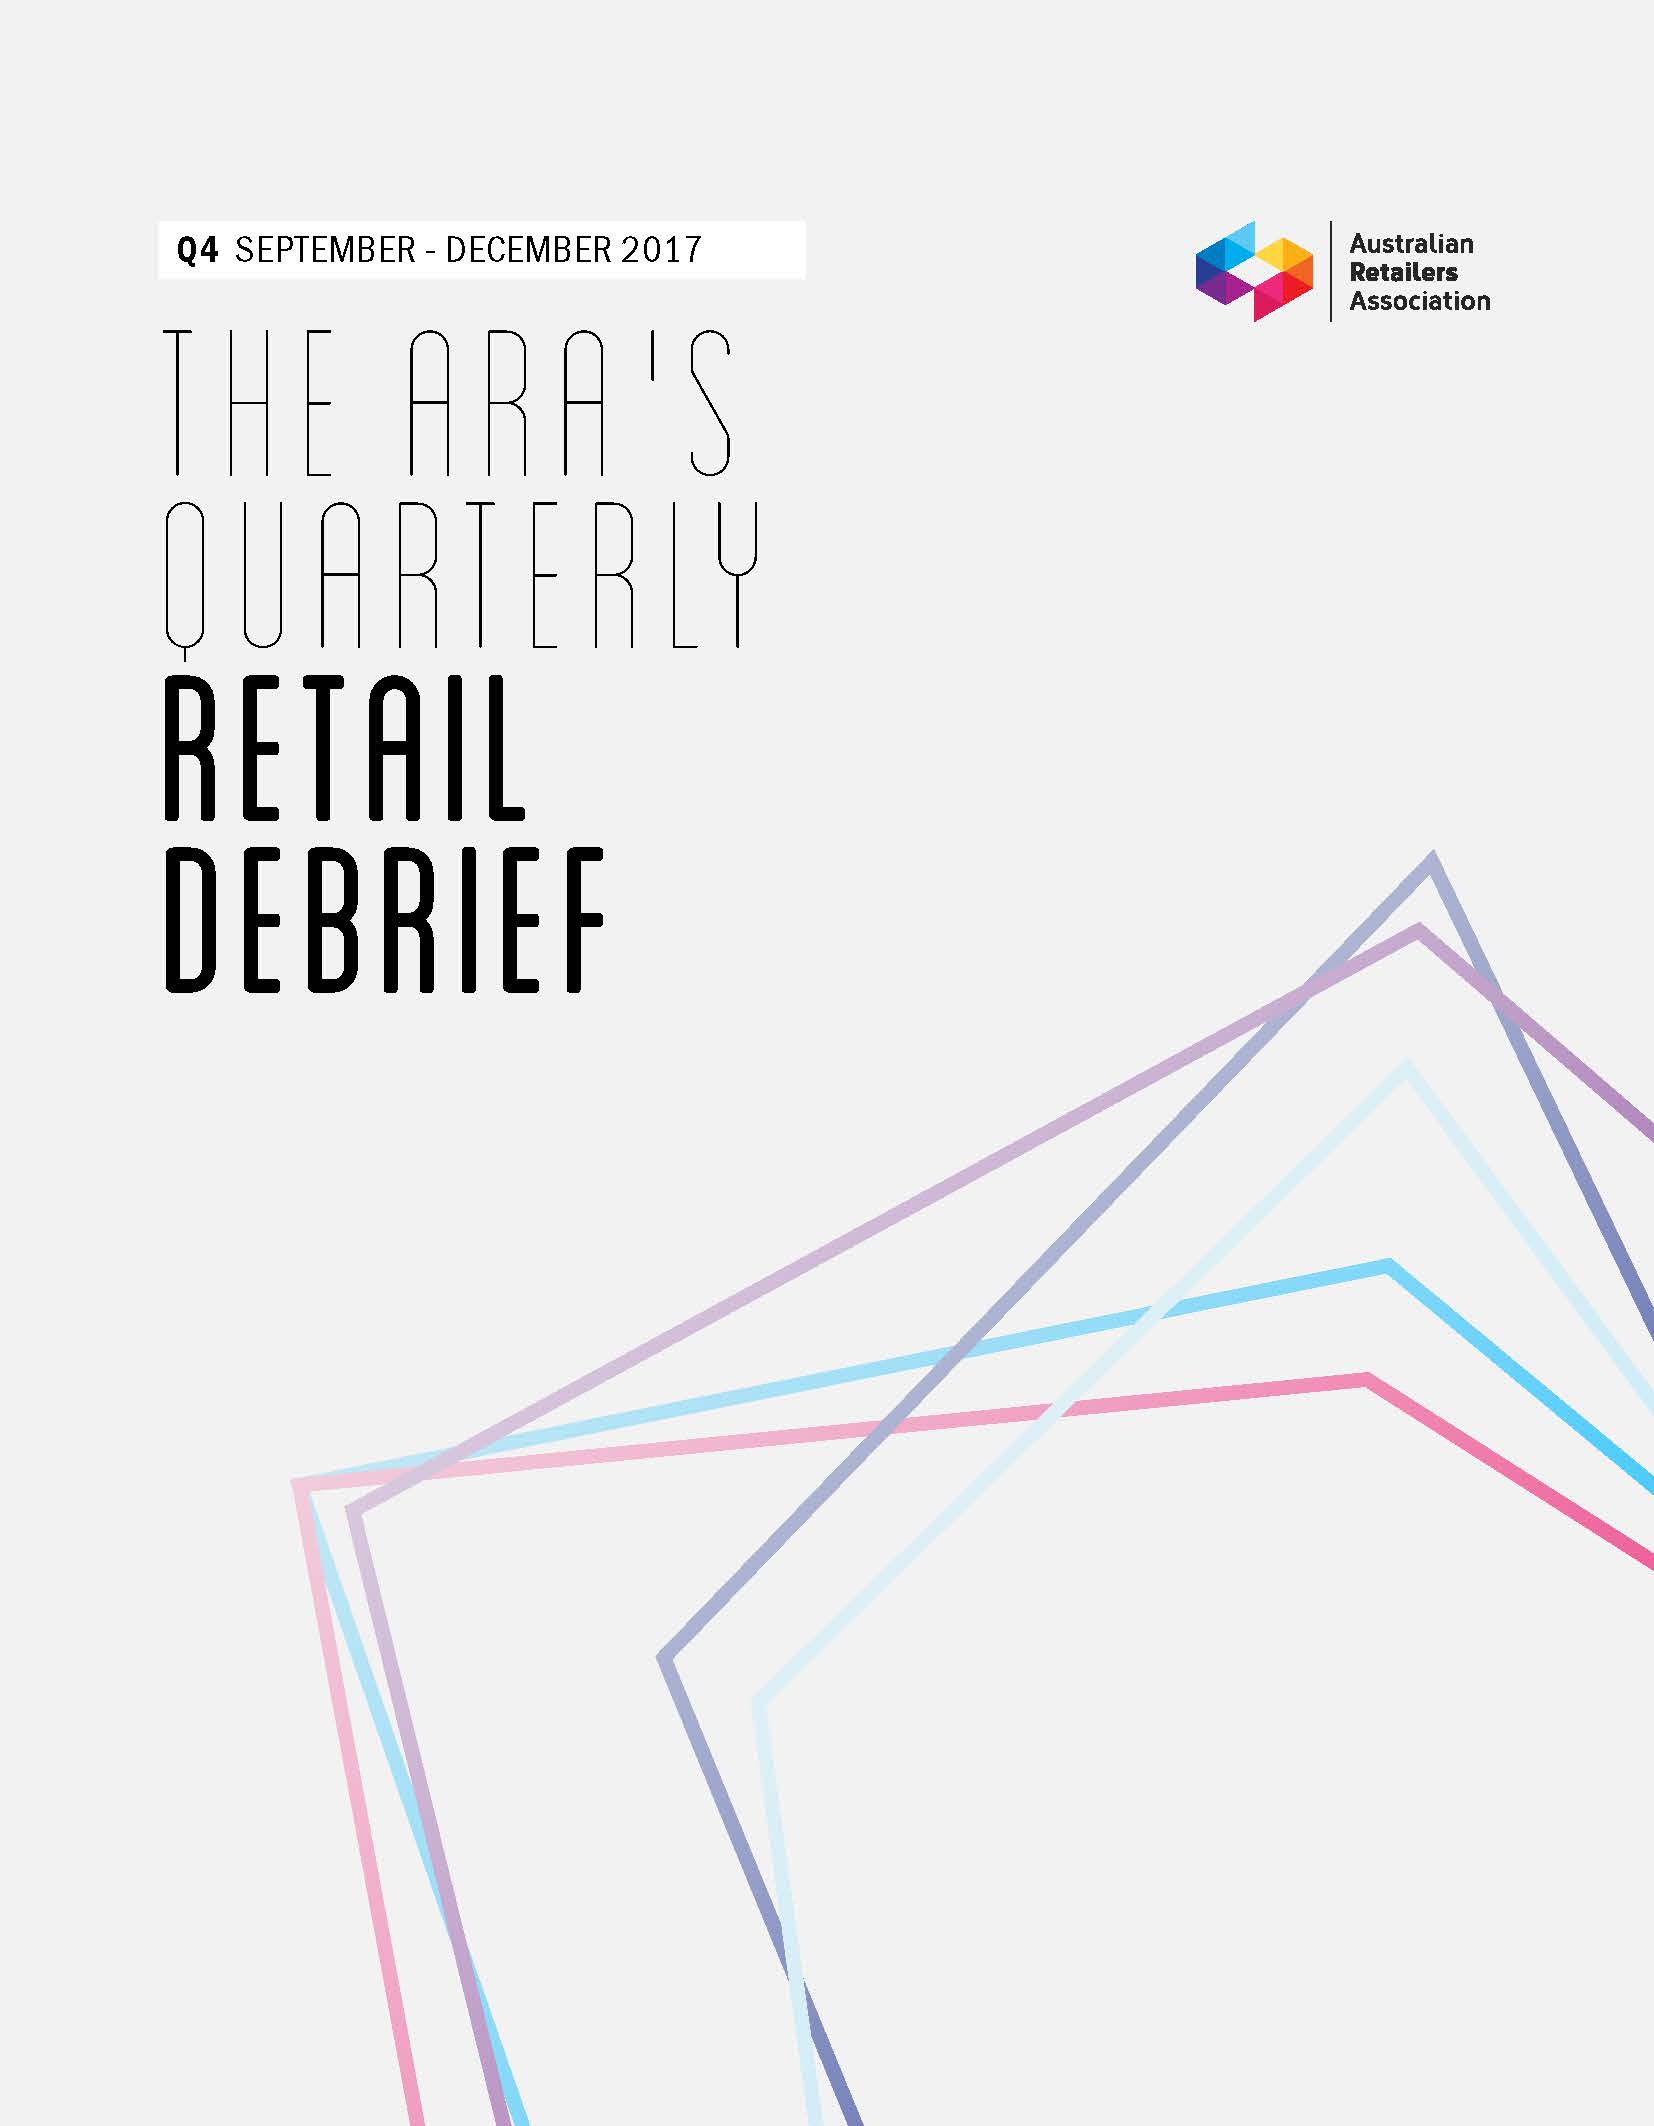 Pages from ARA_Retail Debrief Q4 2017_v3_FINAL-cover.jpg